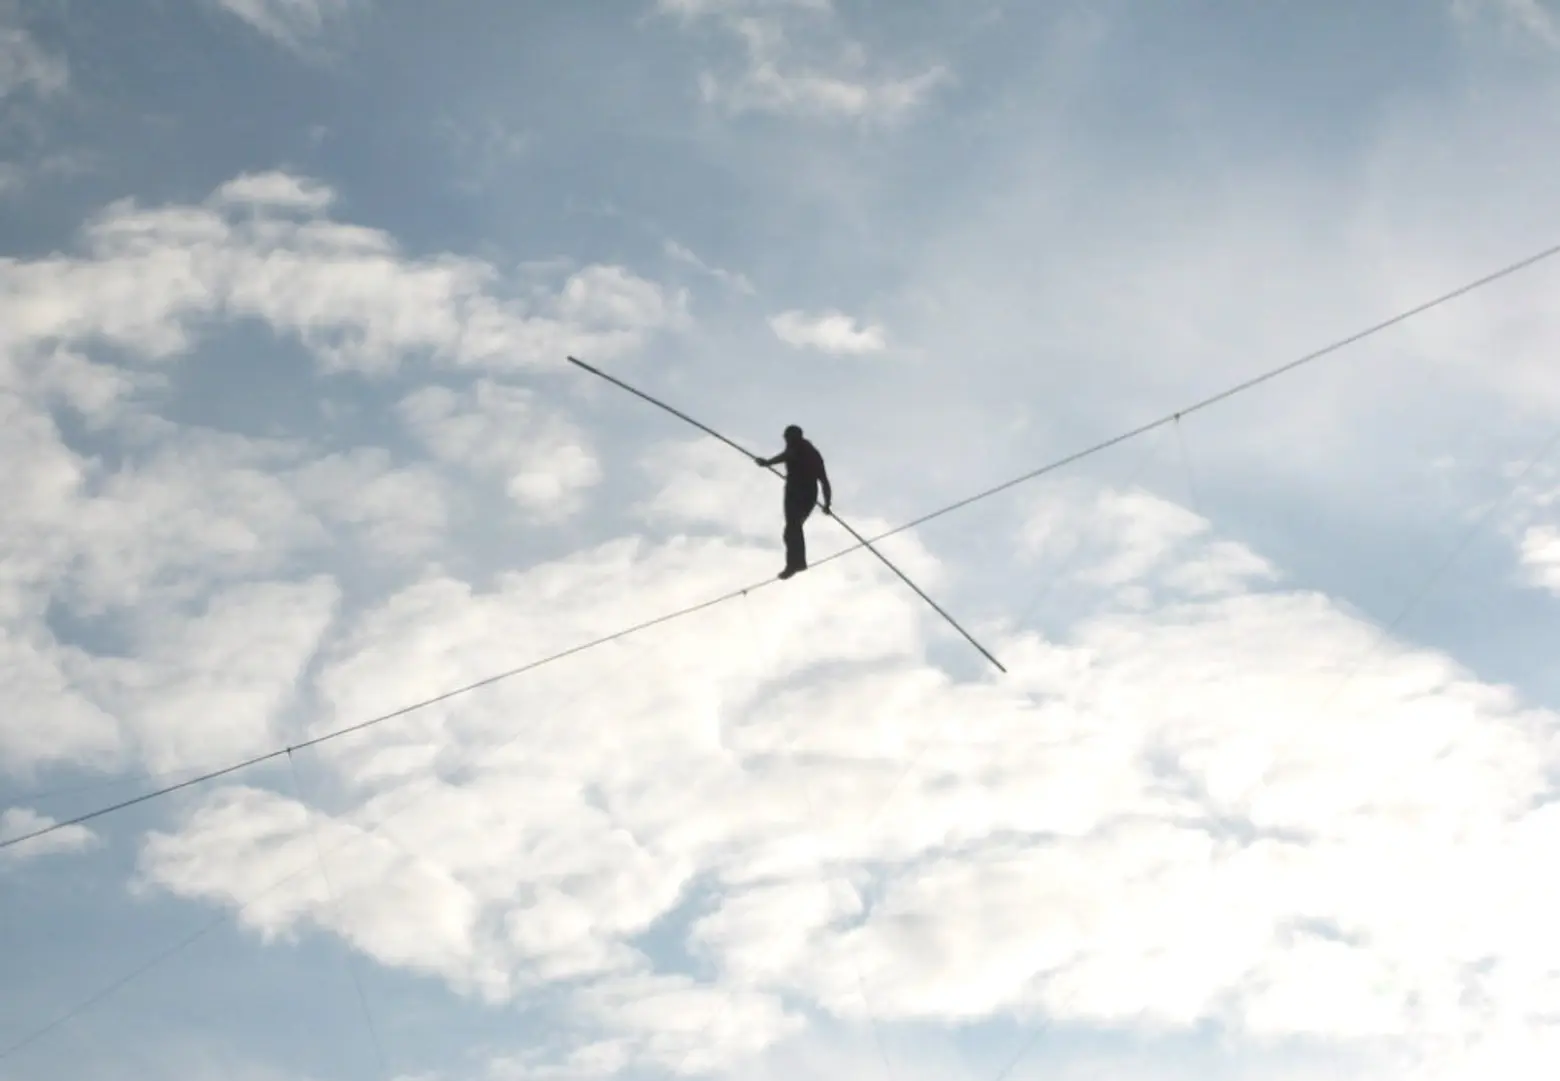 Five Injured After 8-Person Tightrope Stunt Goes Bad in Florida